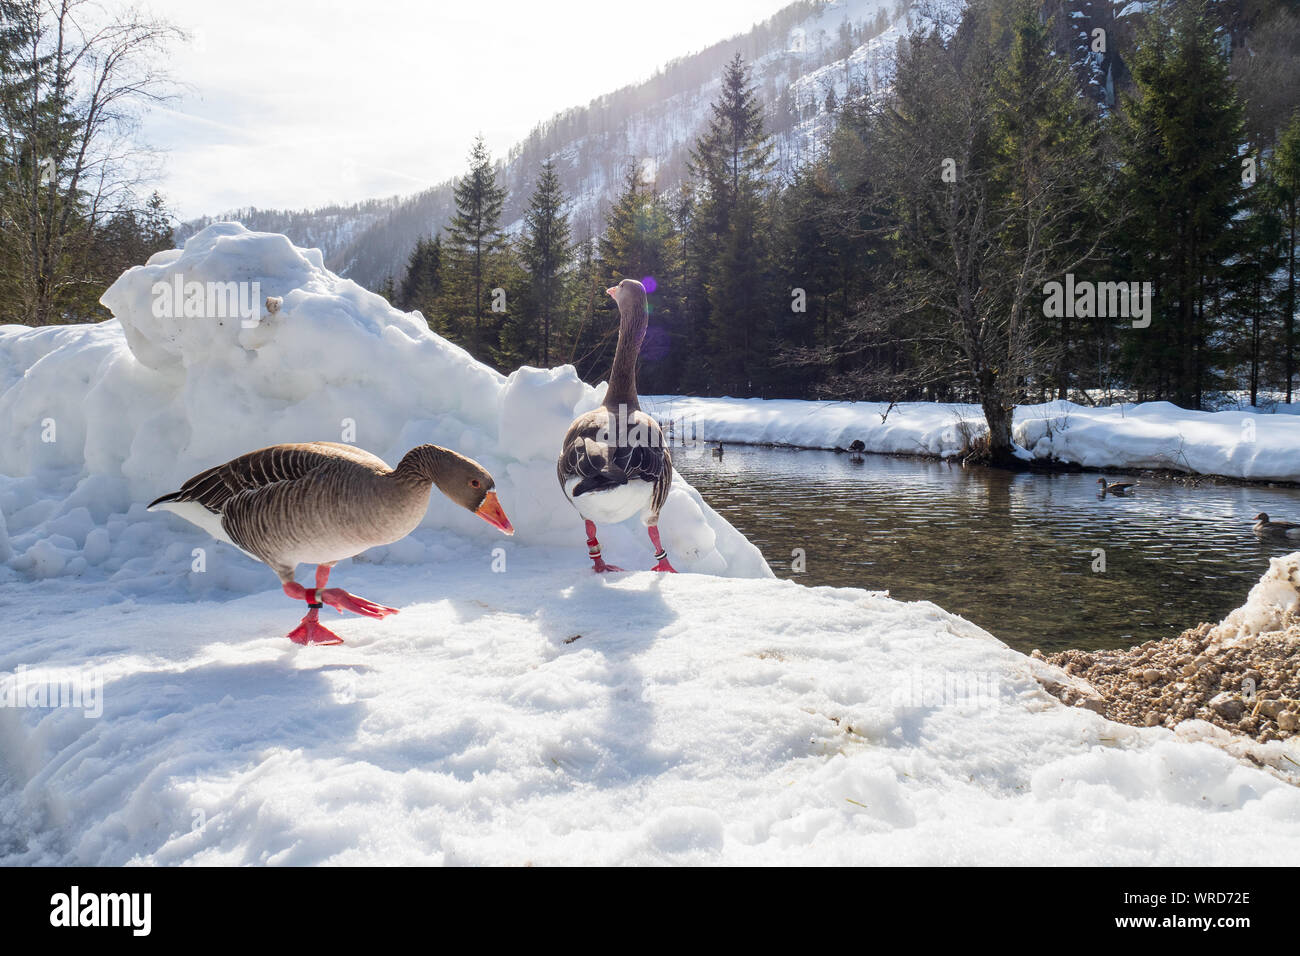 Greylag geese participating in the scientific studies of the Konrad Lorenz Forschungsstelle (KLF) at the bank of the Alm river near Grünau, Austria Stock Photo